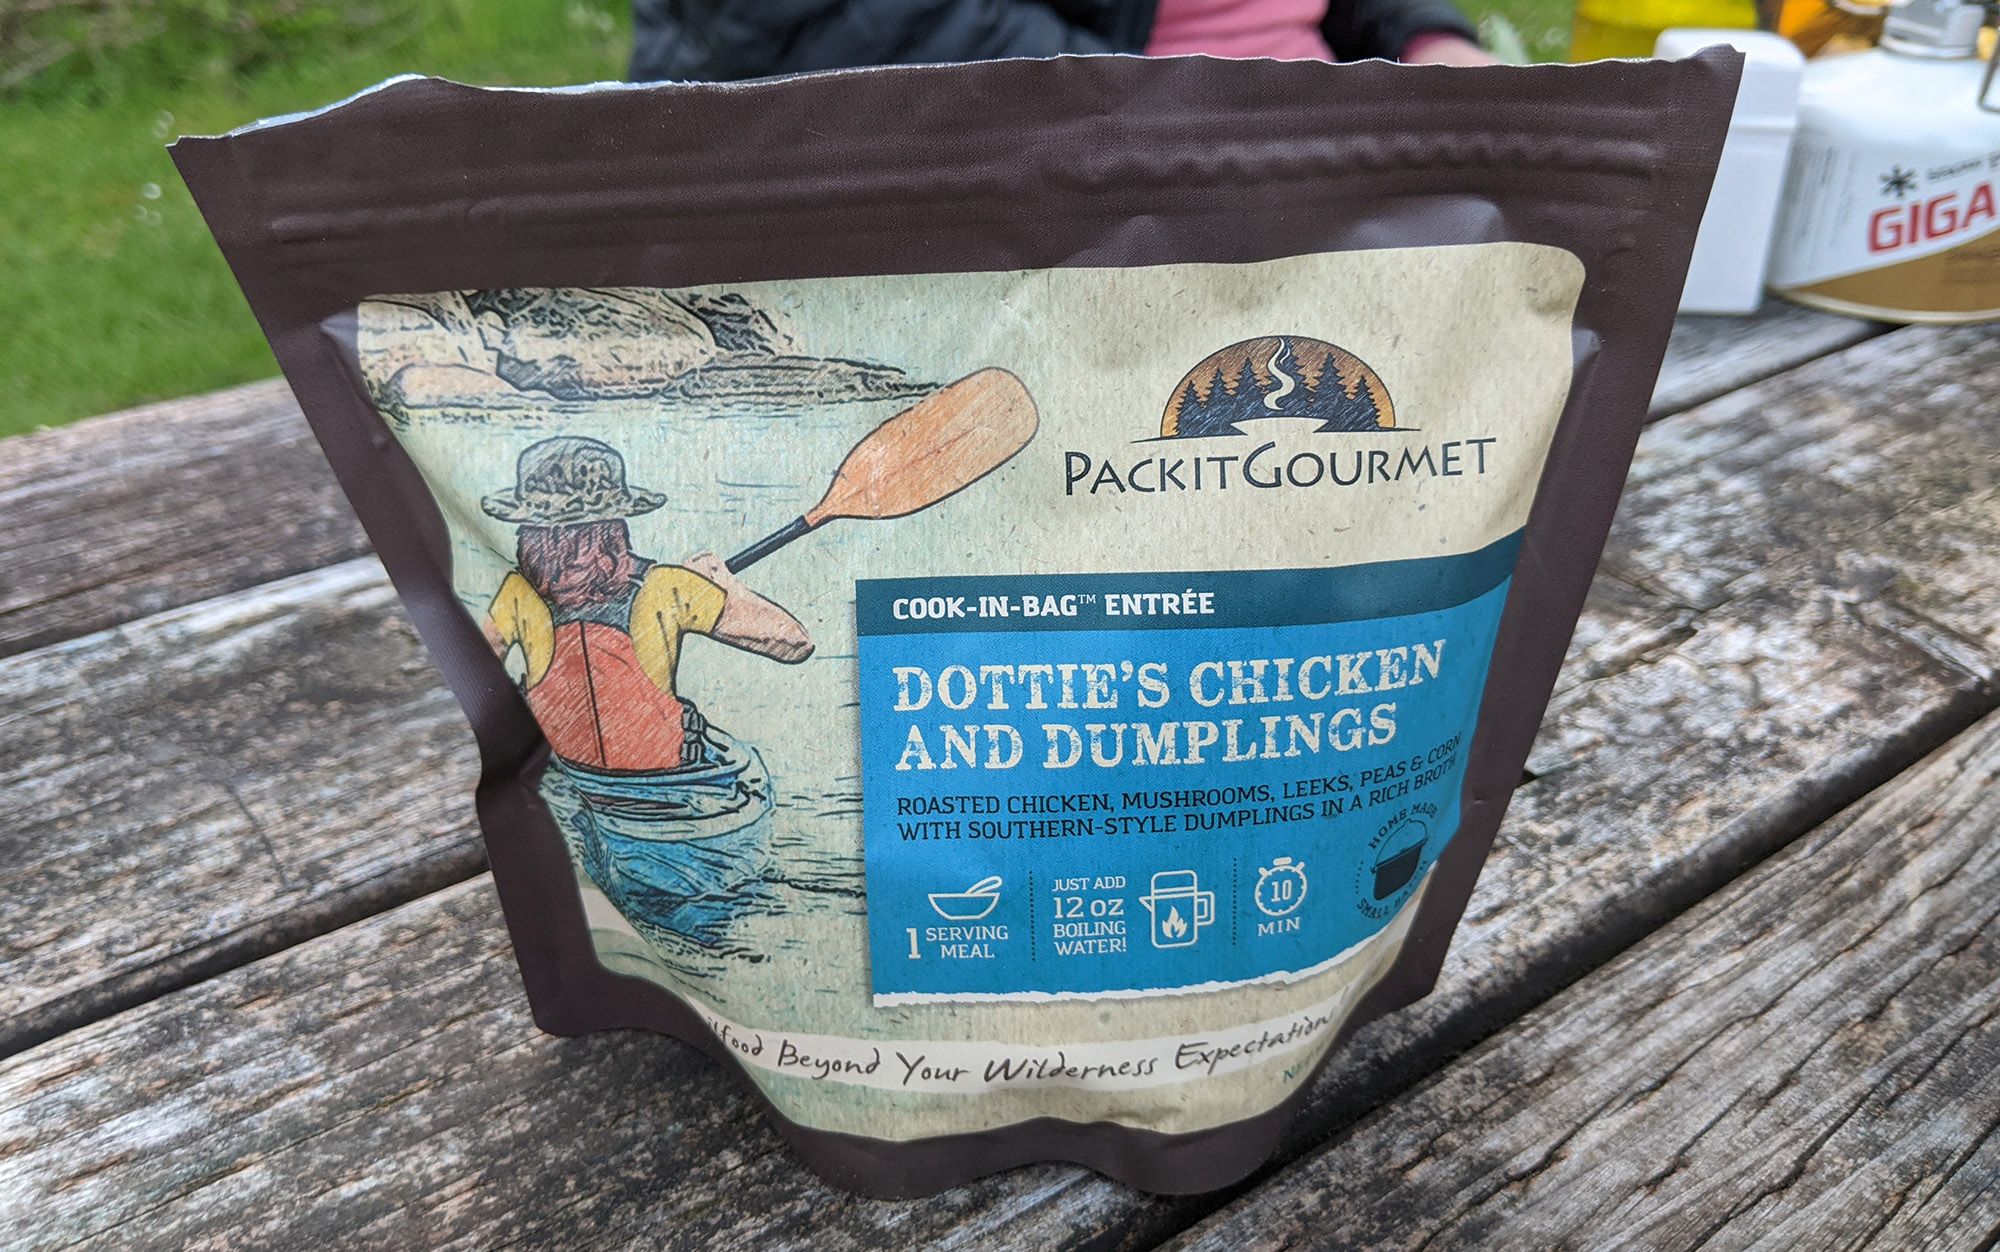 Packit Gourmet is the best value.